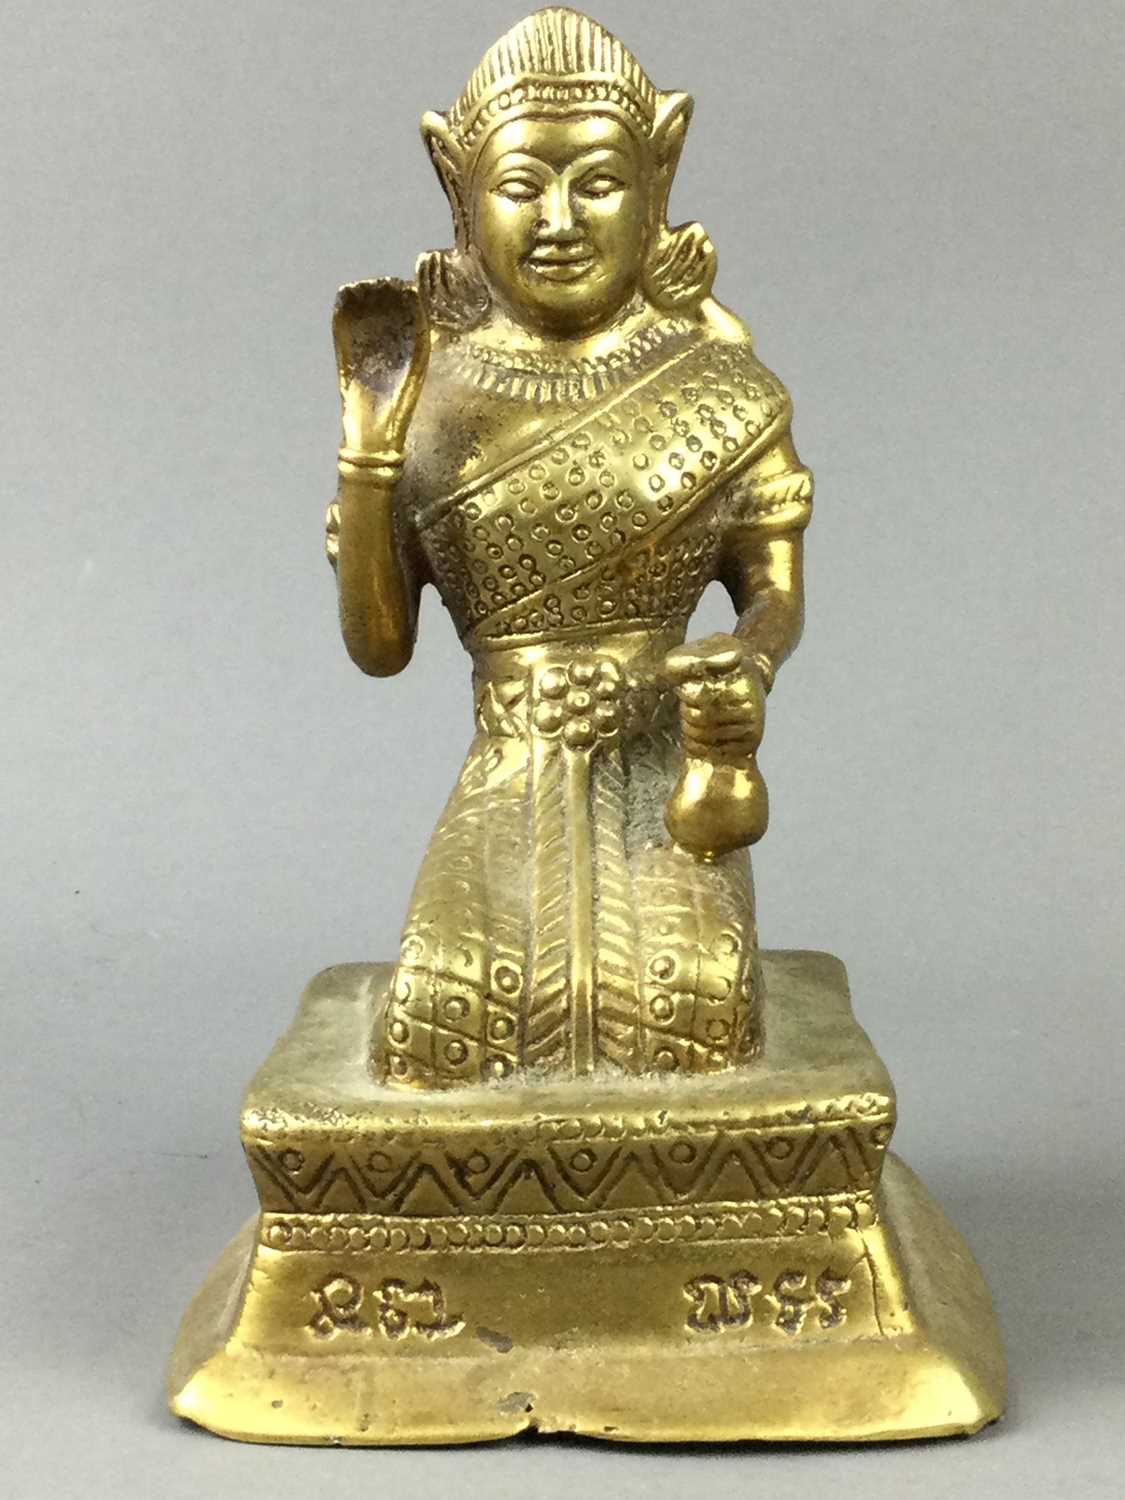 Lot 140 - A LOT OF TWO THAI BRASS BUDDHIST FIGURES